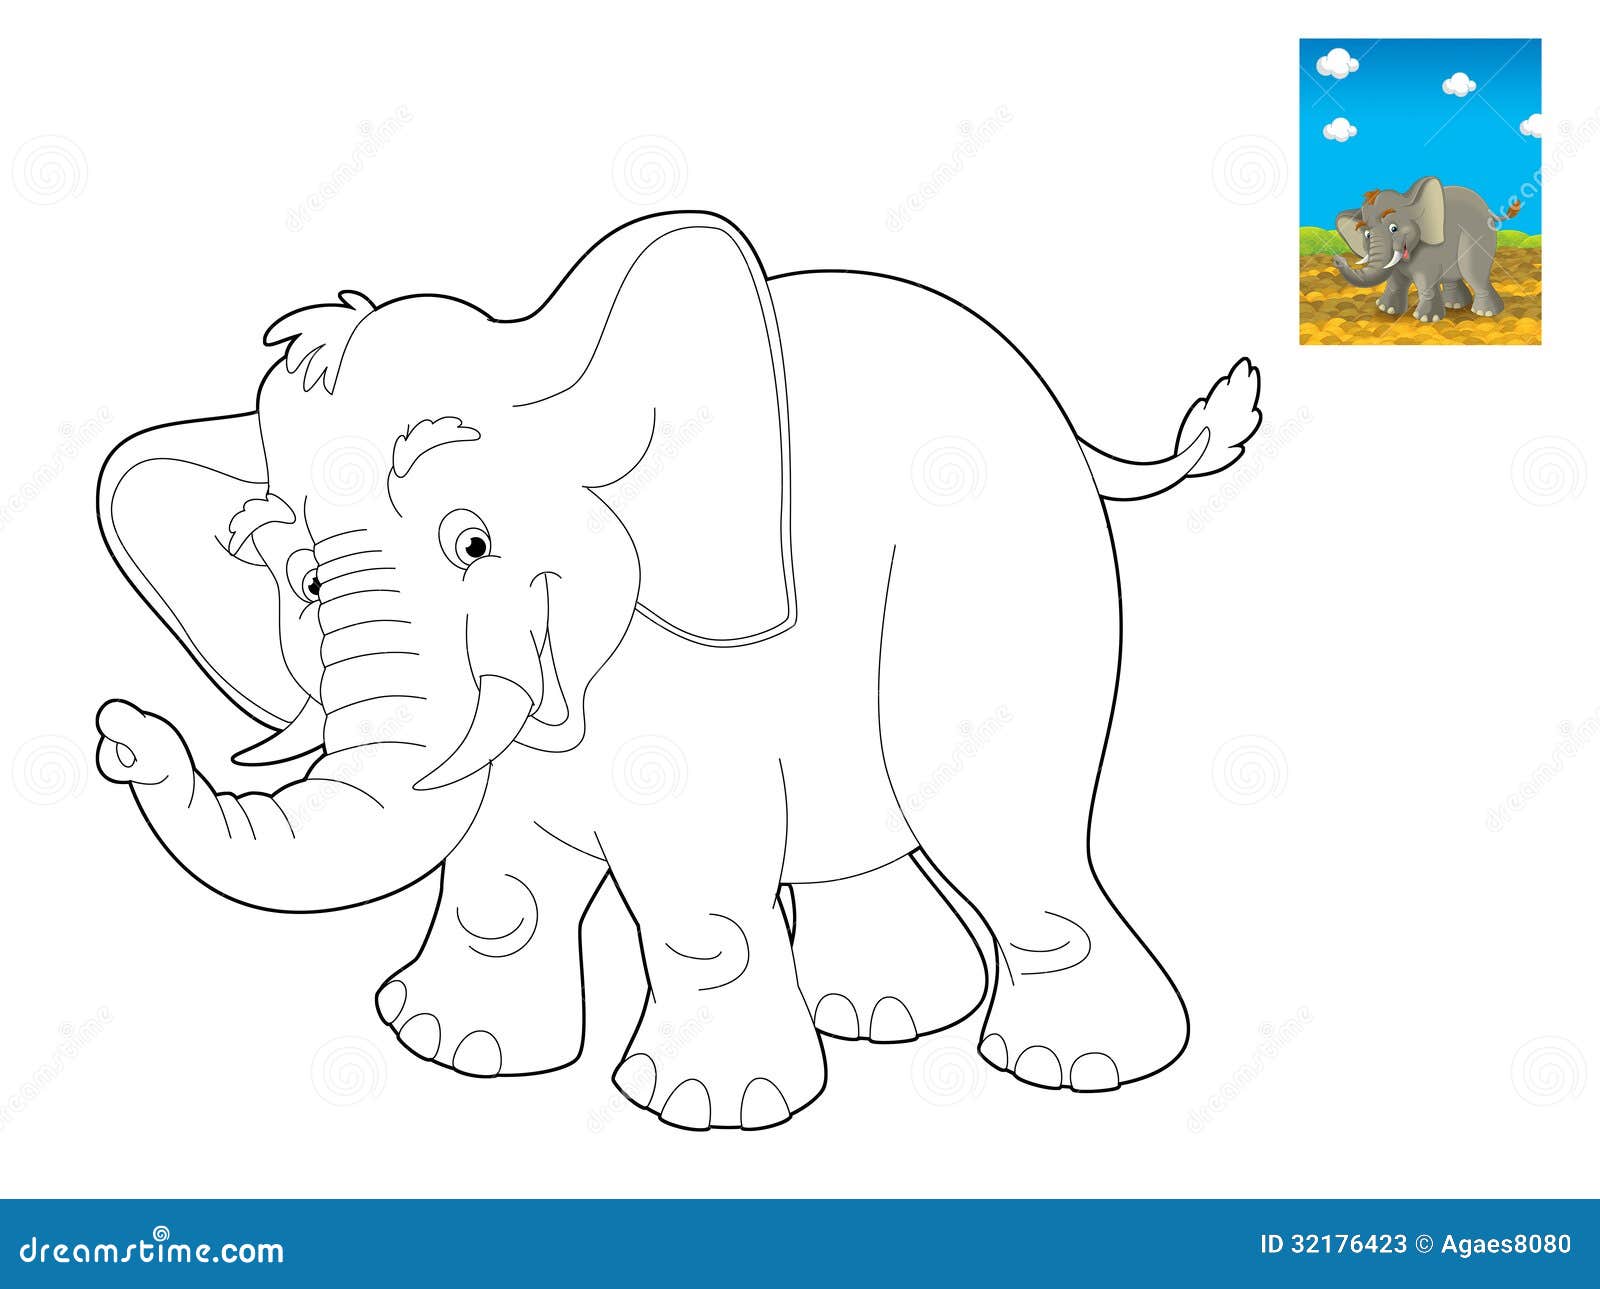 safari people coloring pages - photo #7